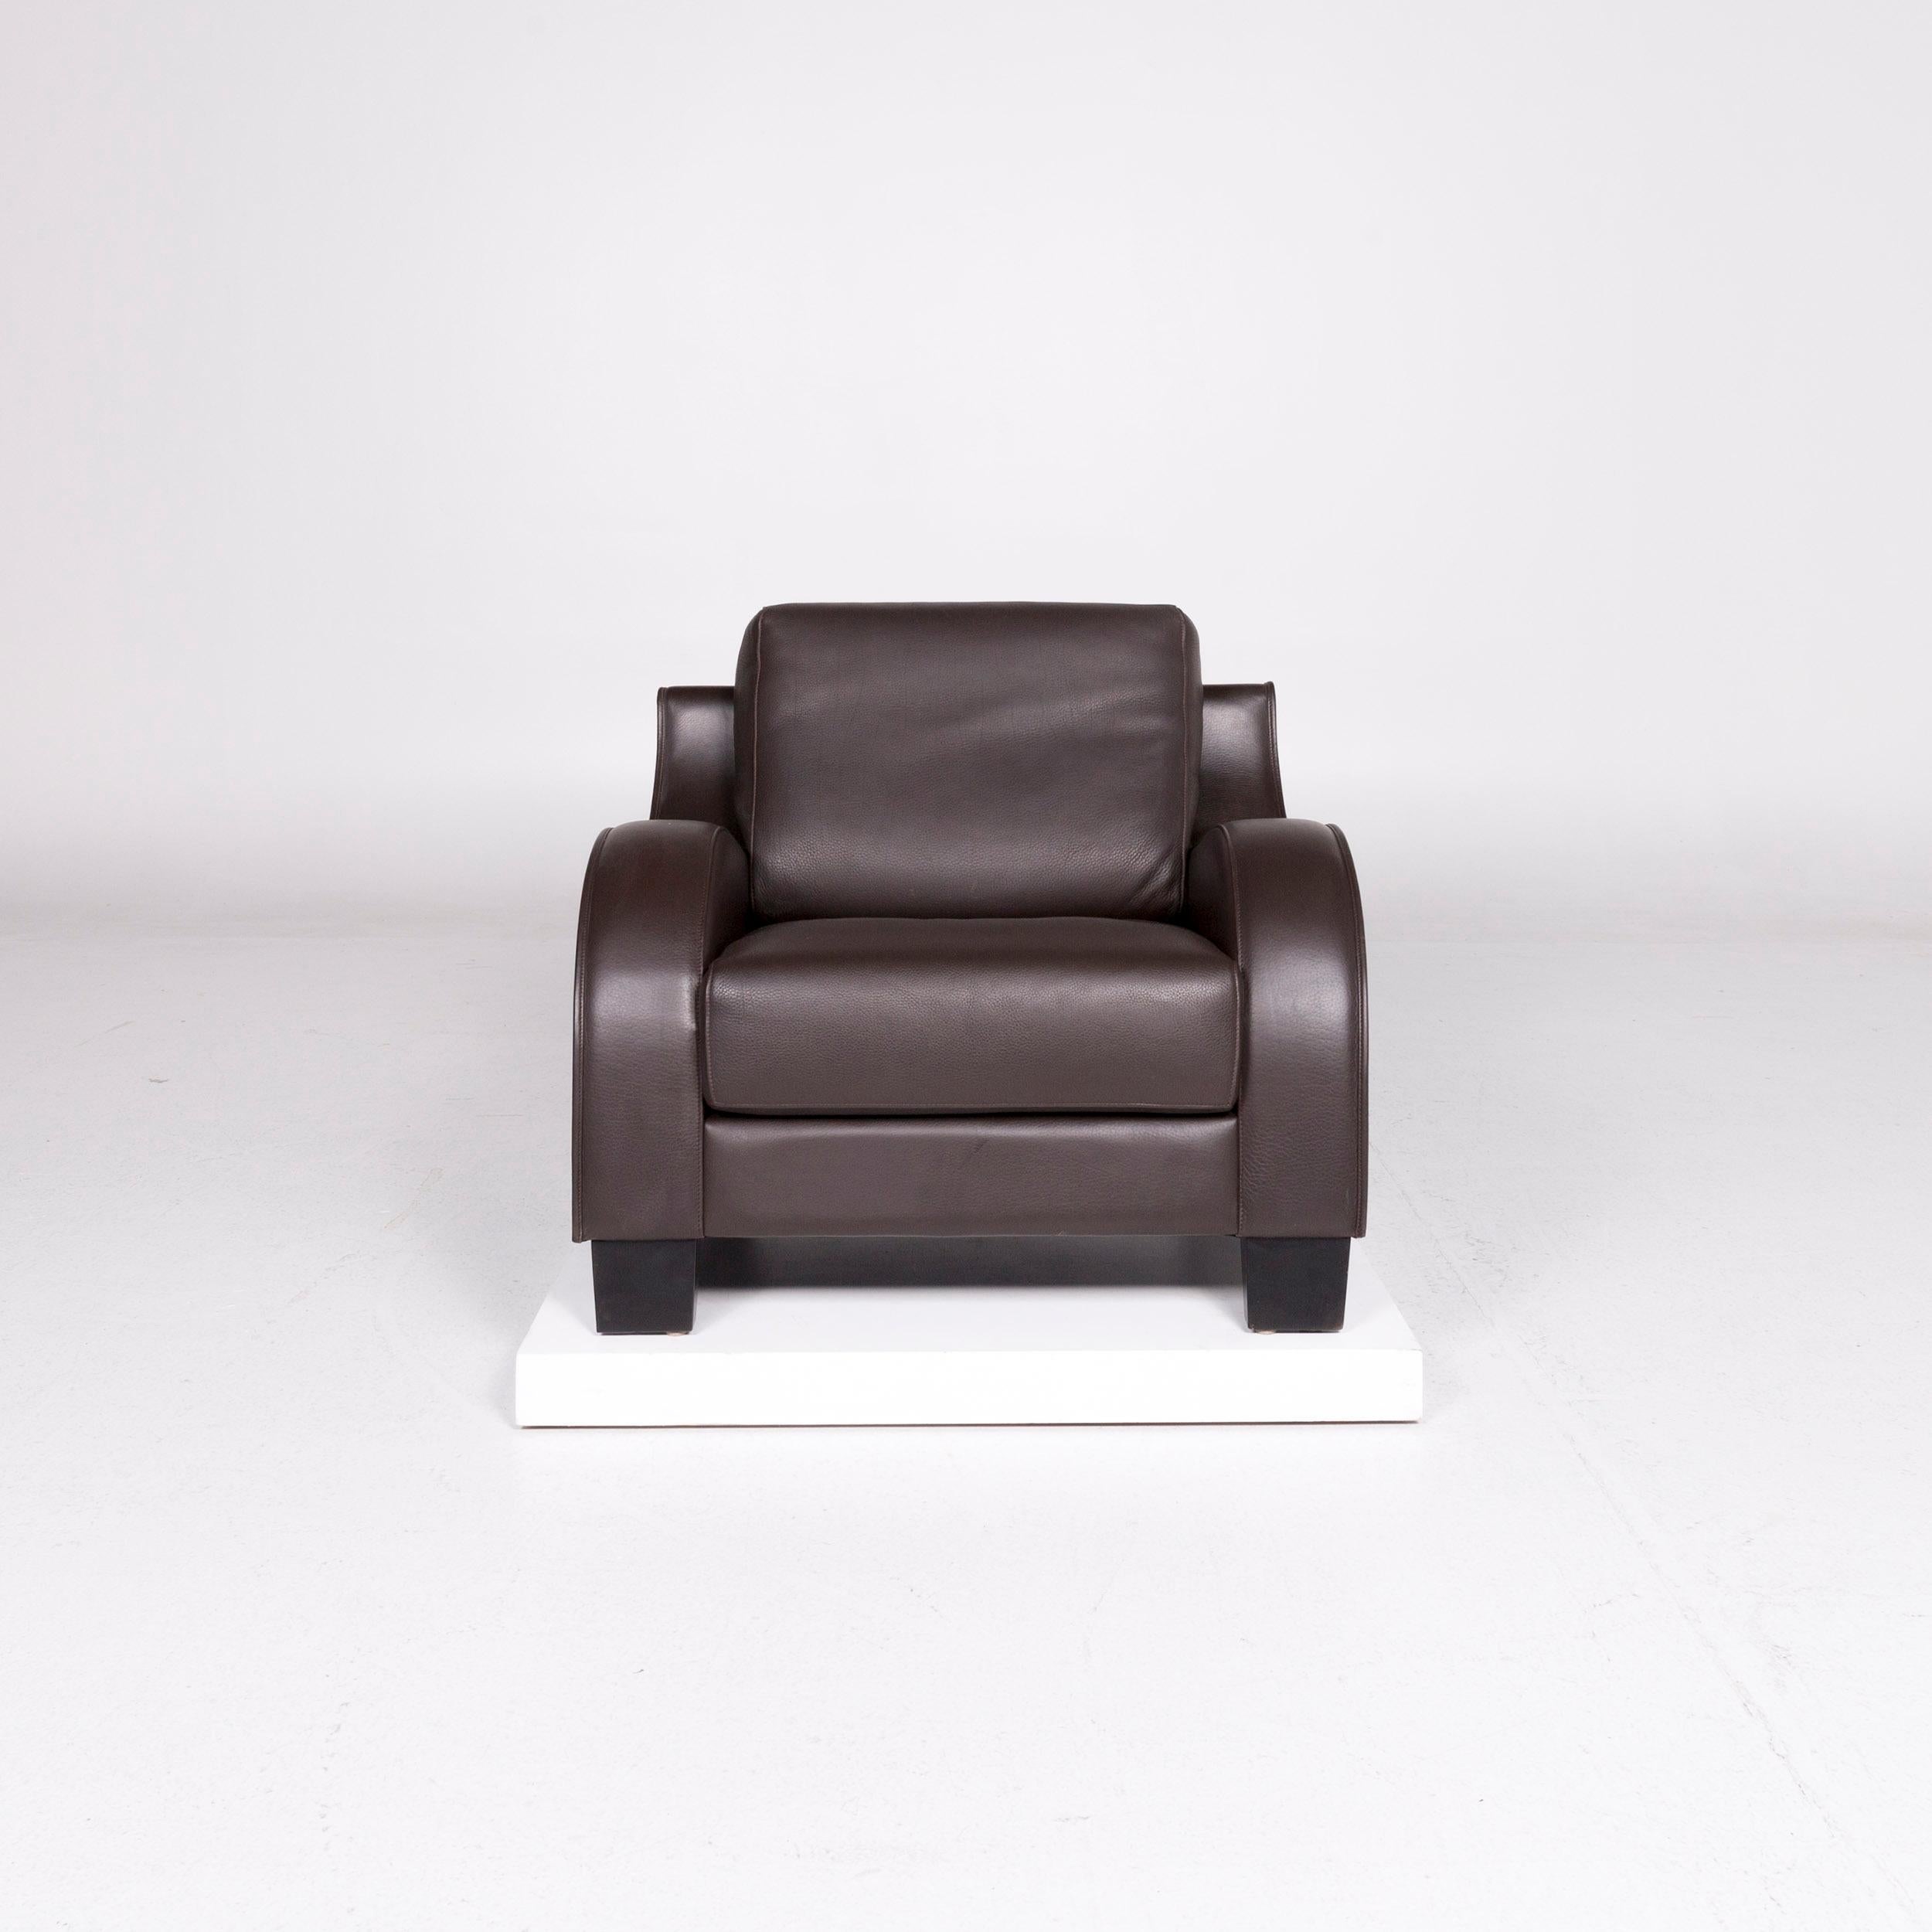 We bring to you a De Sede DS 122-01 leather armchair brown.
   
 
 Product measurements in centimeters:
 
 Depth 91
Width 89
Height 80
Seat-height 44
Rest-height 55
Seat-depth 54
Seat-width 58
Back-height 37.